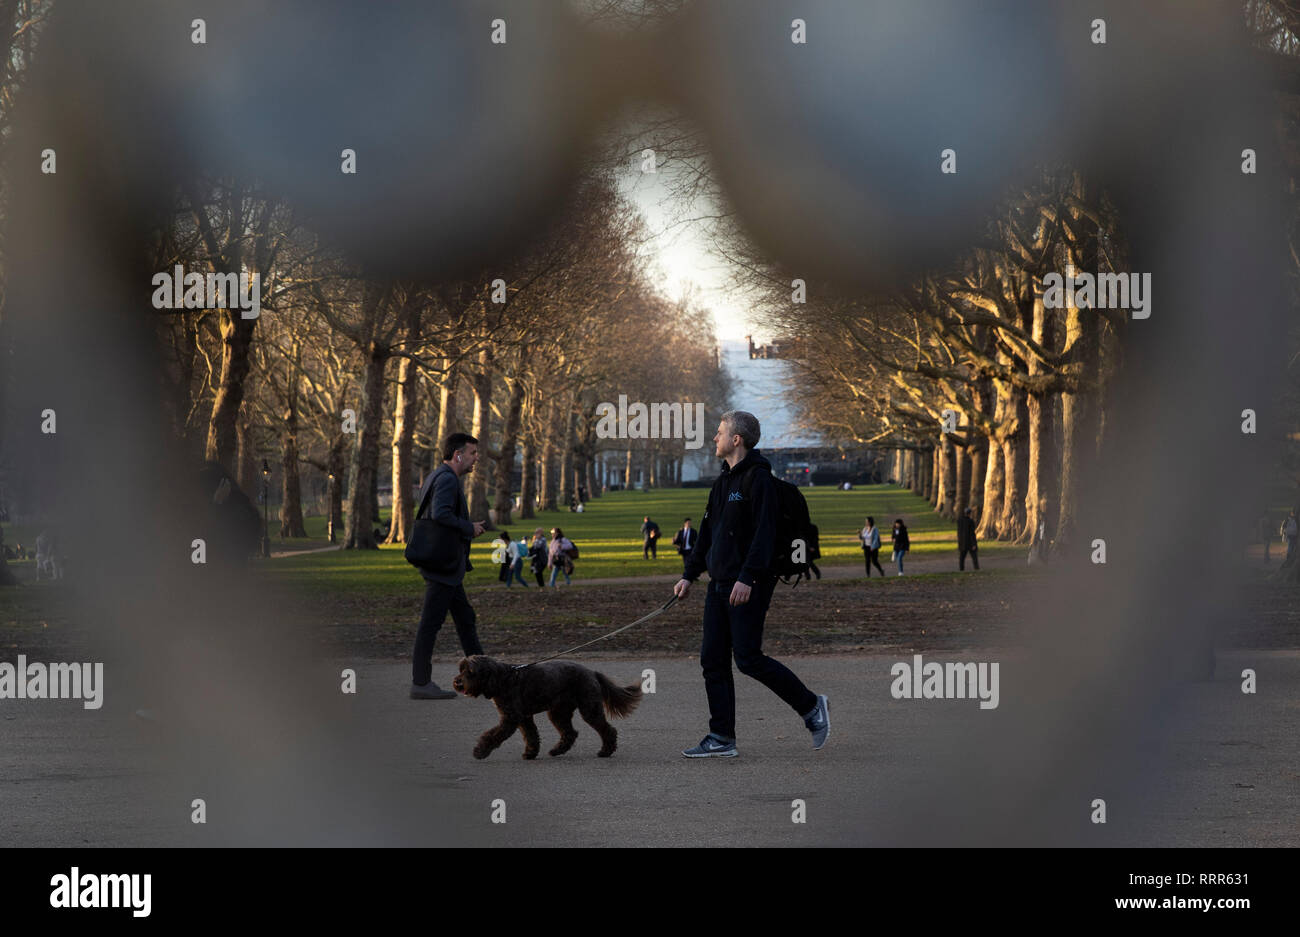 London, Britain. 26th Feb, 2019. People walk at the Green Park in London, Britain, on Feb. 26, 2019. Britain experienced its warmest February day on record Monday as the highest temperature reached 20.3 degrees Celsius in Wales. It was also the first time that a temperature exceeding 20 degrees in winter was recorded. It broke Britain's record of the highest February temperature of 19.7 degrees set at Greenwich in 1998. Credit: Han Yan/Xinhua/Alamy Live News Stock Photo